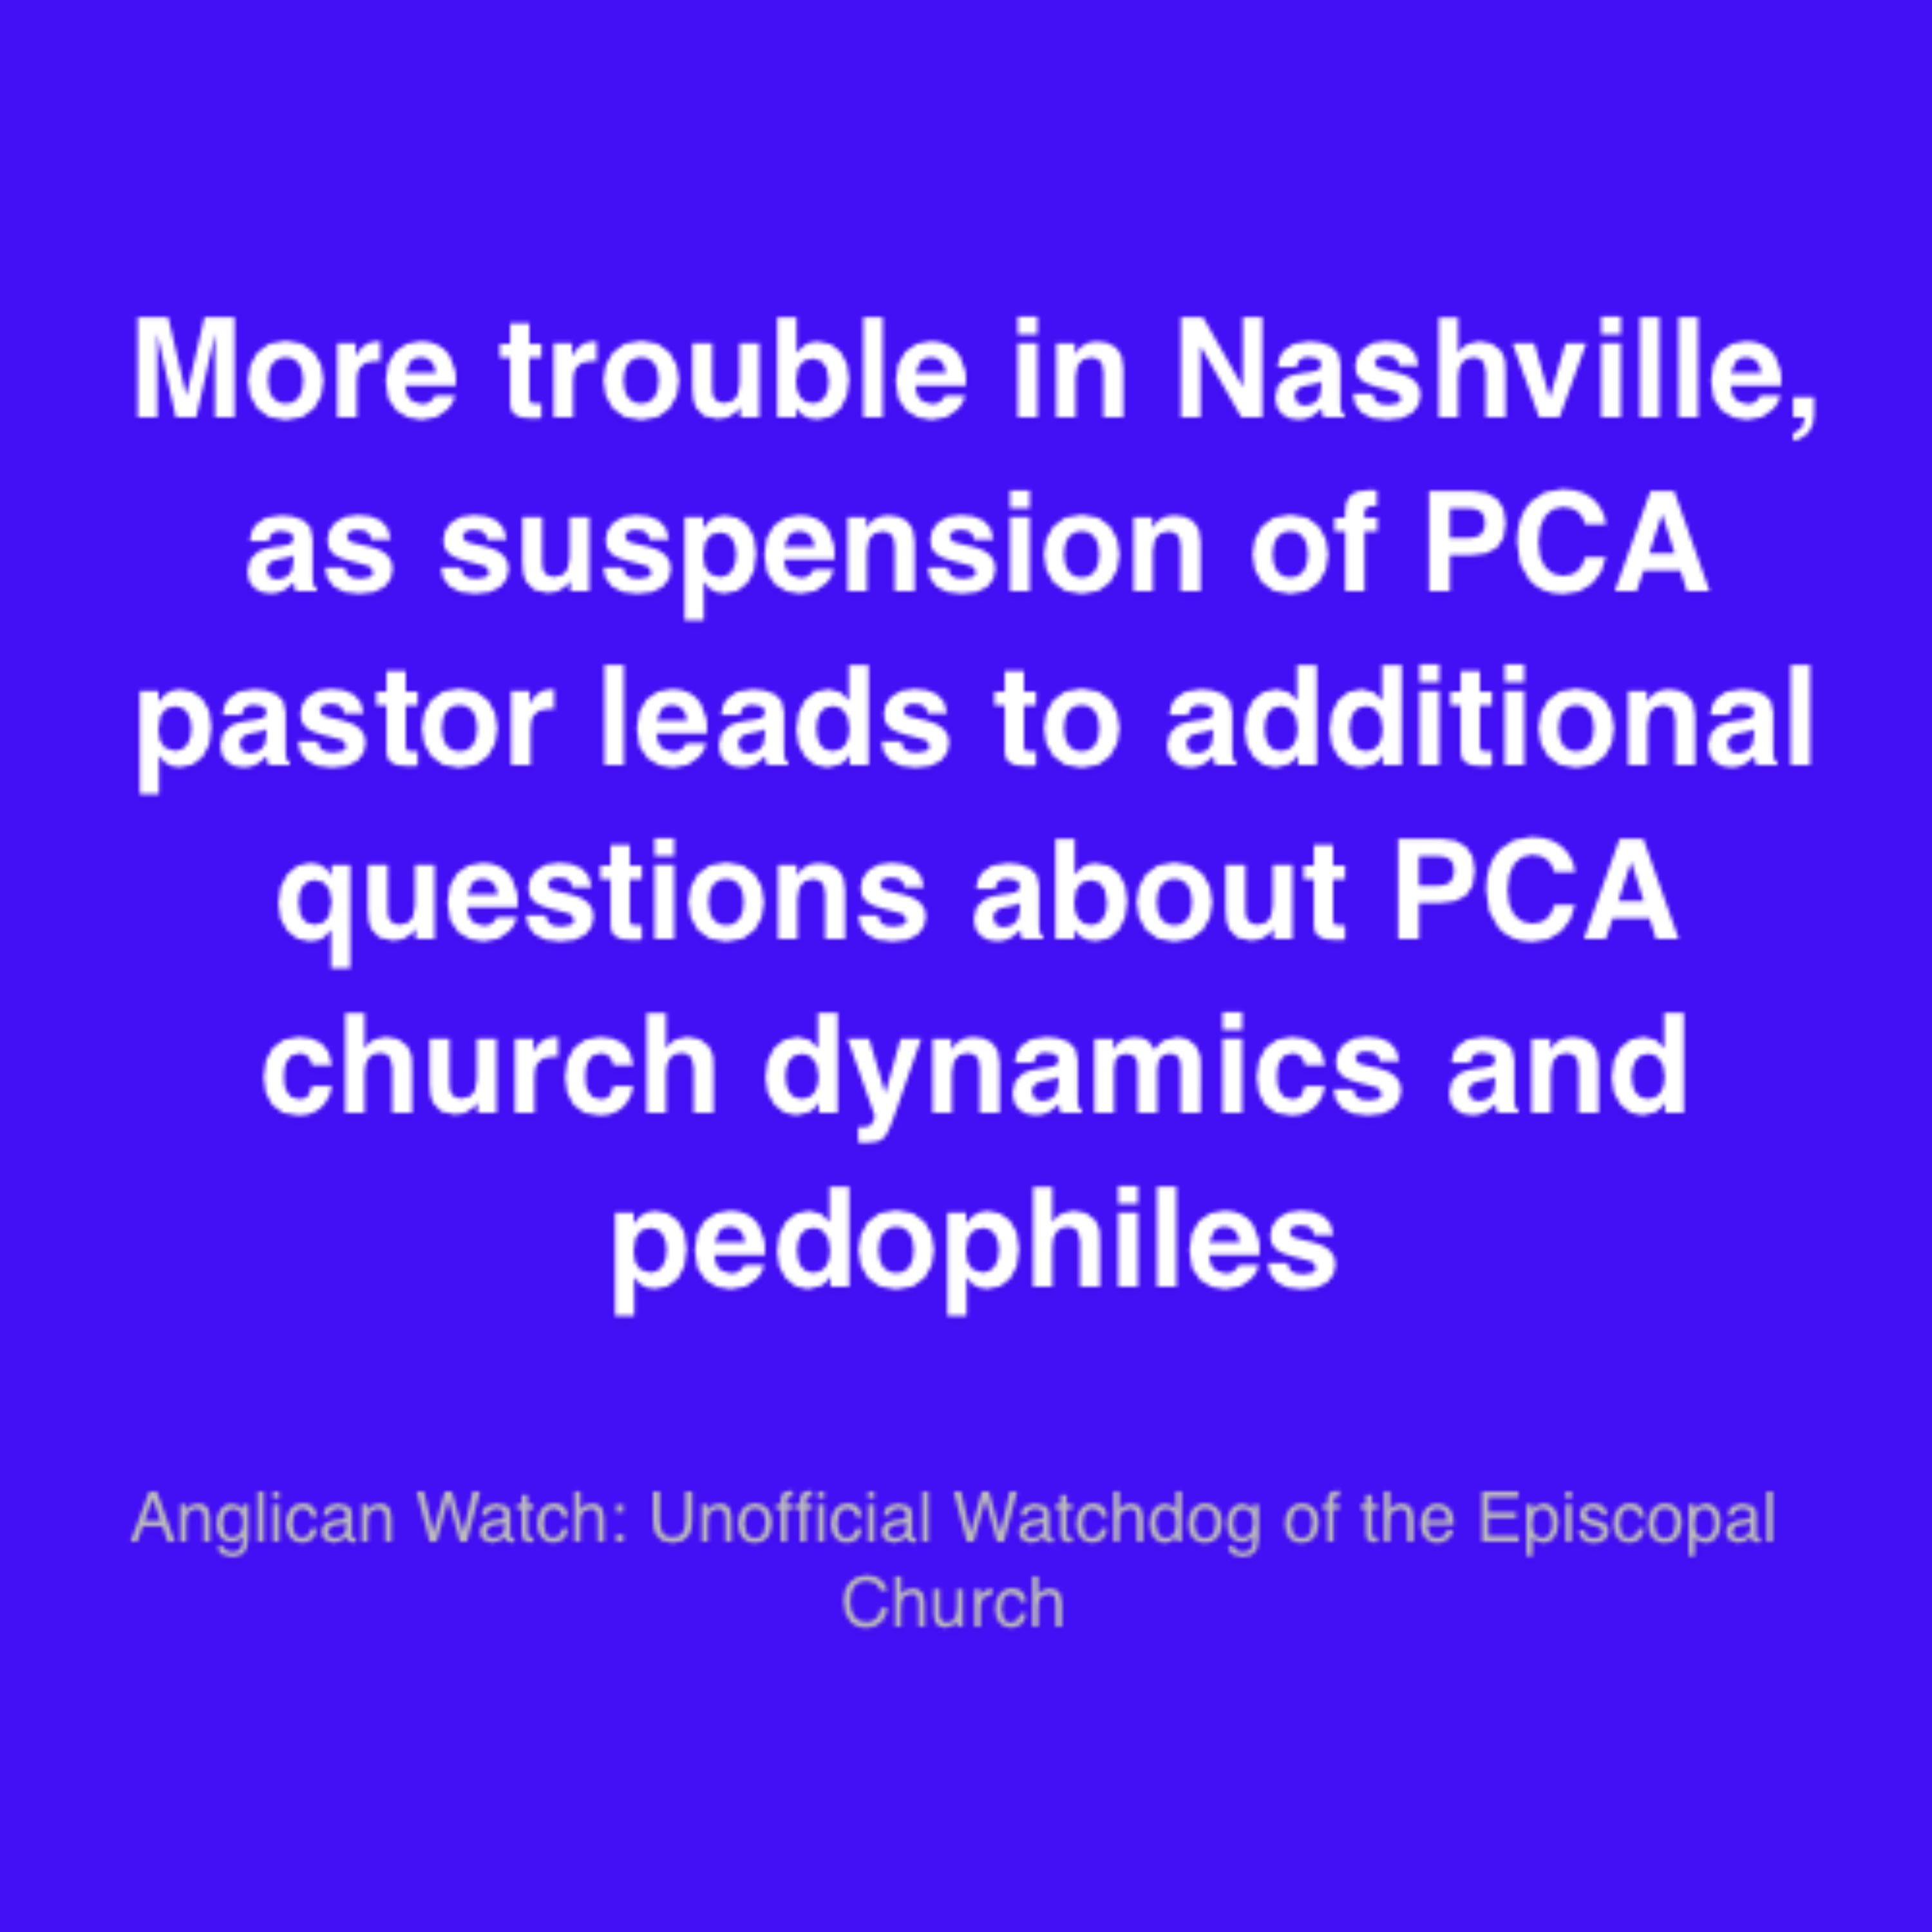 More trouble in Nashville, as suspension of PCA pastor leads to additional questions about PCA church dynamics and pedophiles